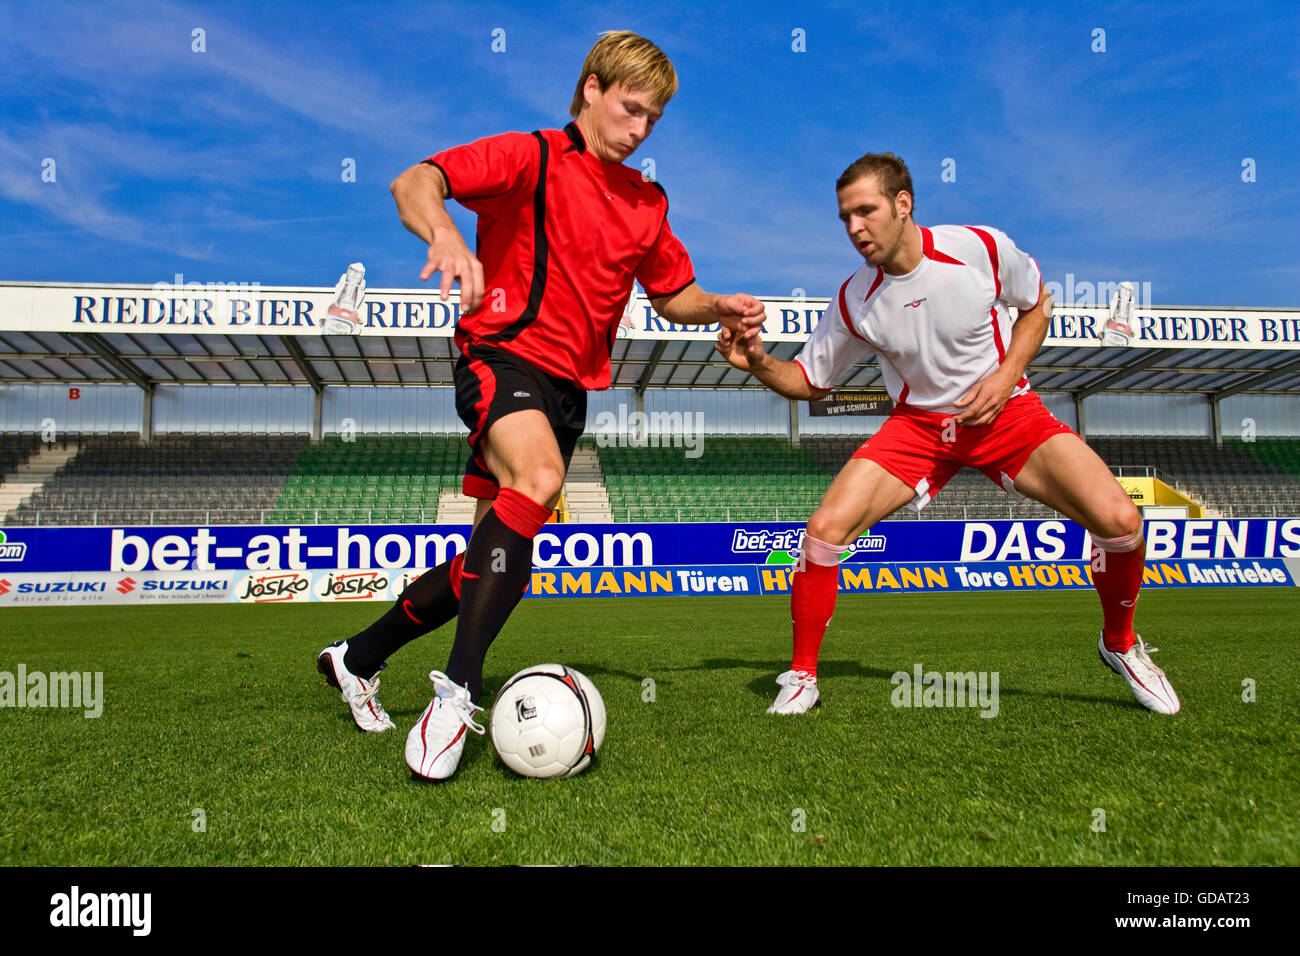 Foot,football,sport,action,dribble,défense,duel ball,les hommes, Banque D'Images